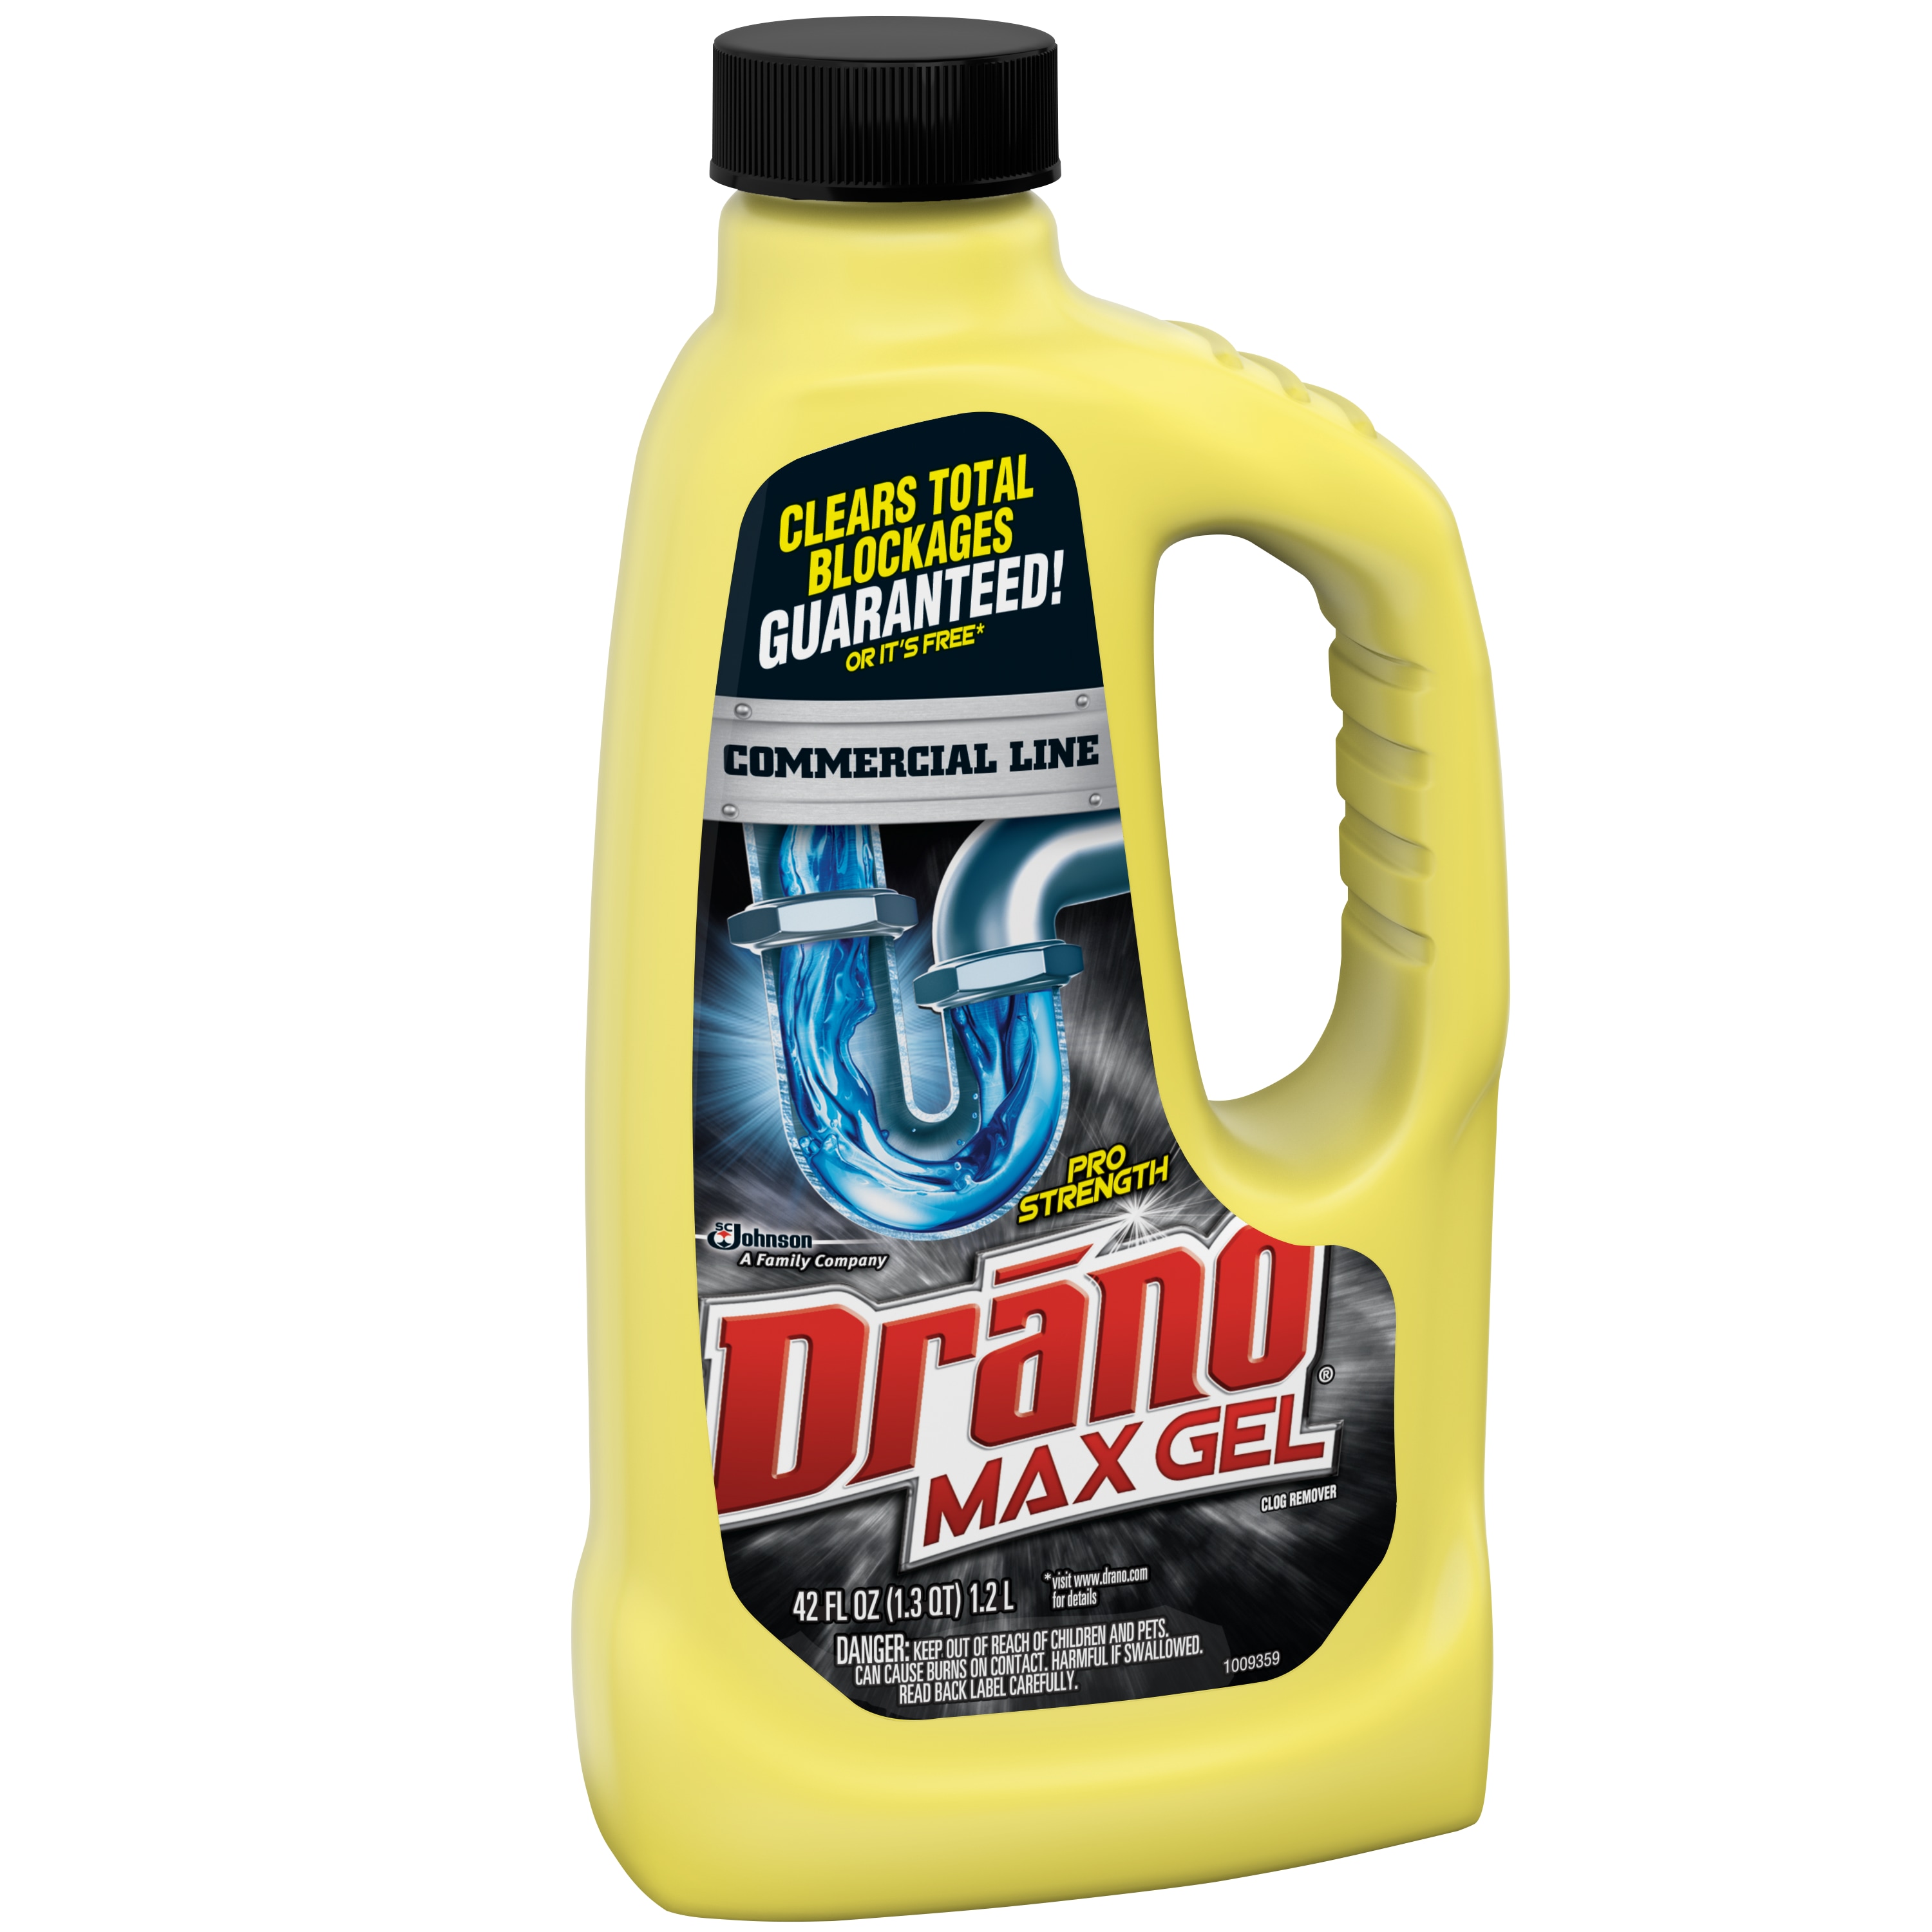 Drano Dual-force foamer Clog Remover 17-fl oz Drain Cleaner in the